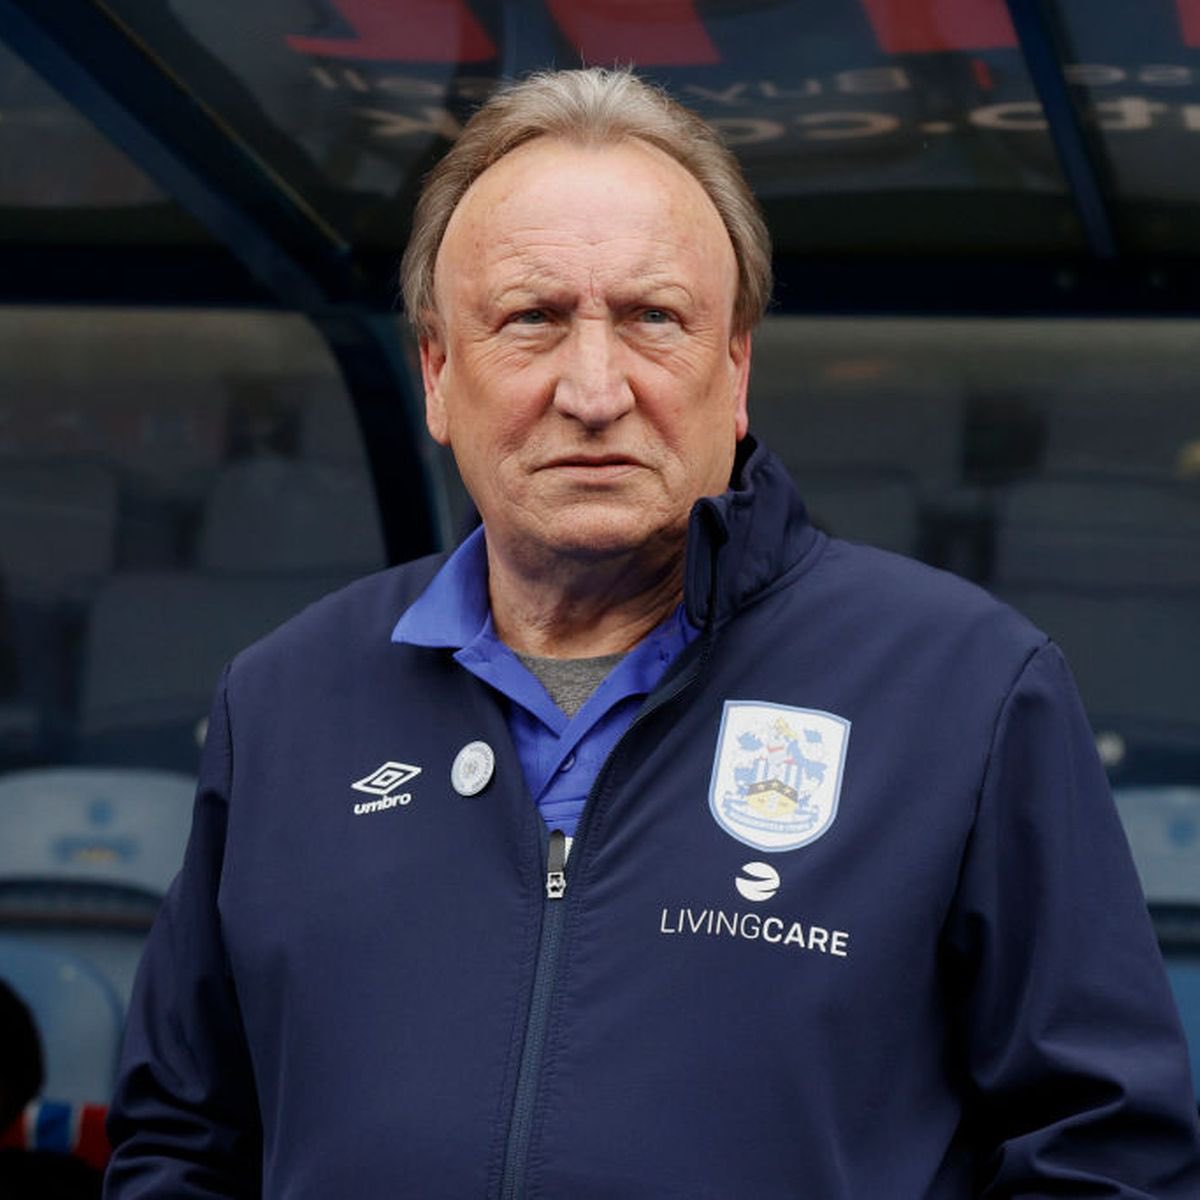 Neil Warnock has performed a U-turn and is set to CONTINUE as manager of Huddersfield next season. 

He’s been persuaded to sign a one-year deal and turns 75 in December.

(Via: @MattHughesDM)

#HTAFC